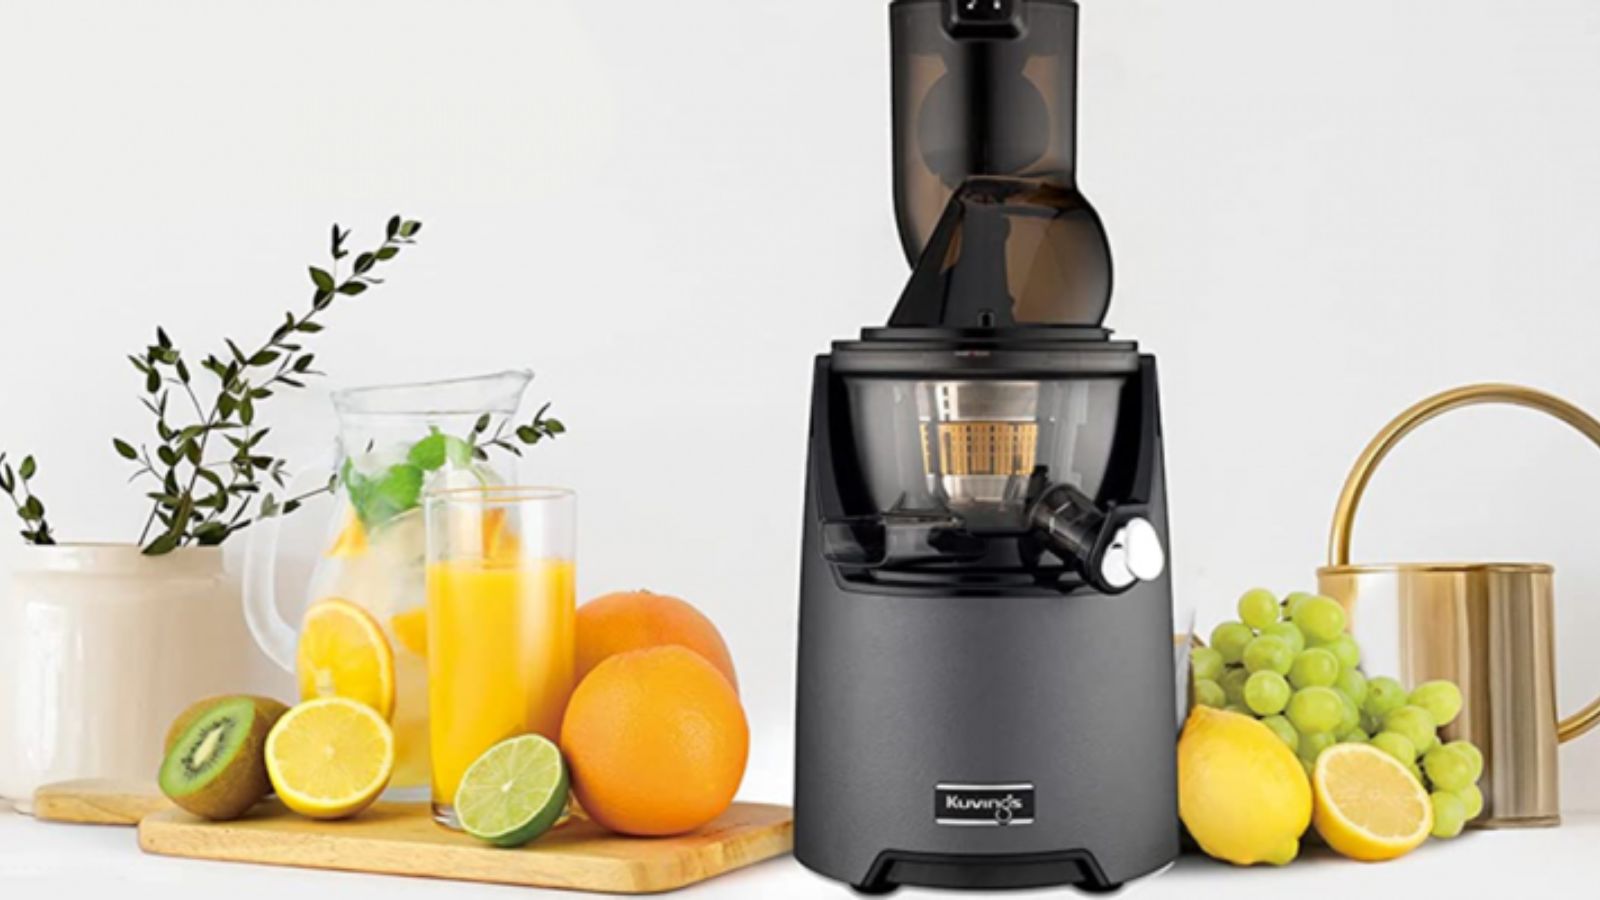 Best Juicer for Traveling: Top Picks for Fresh Juices on the Go